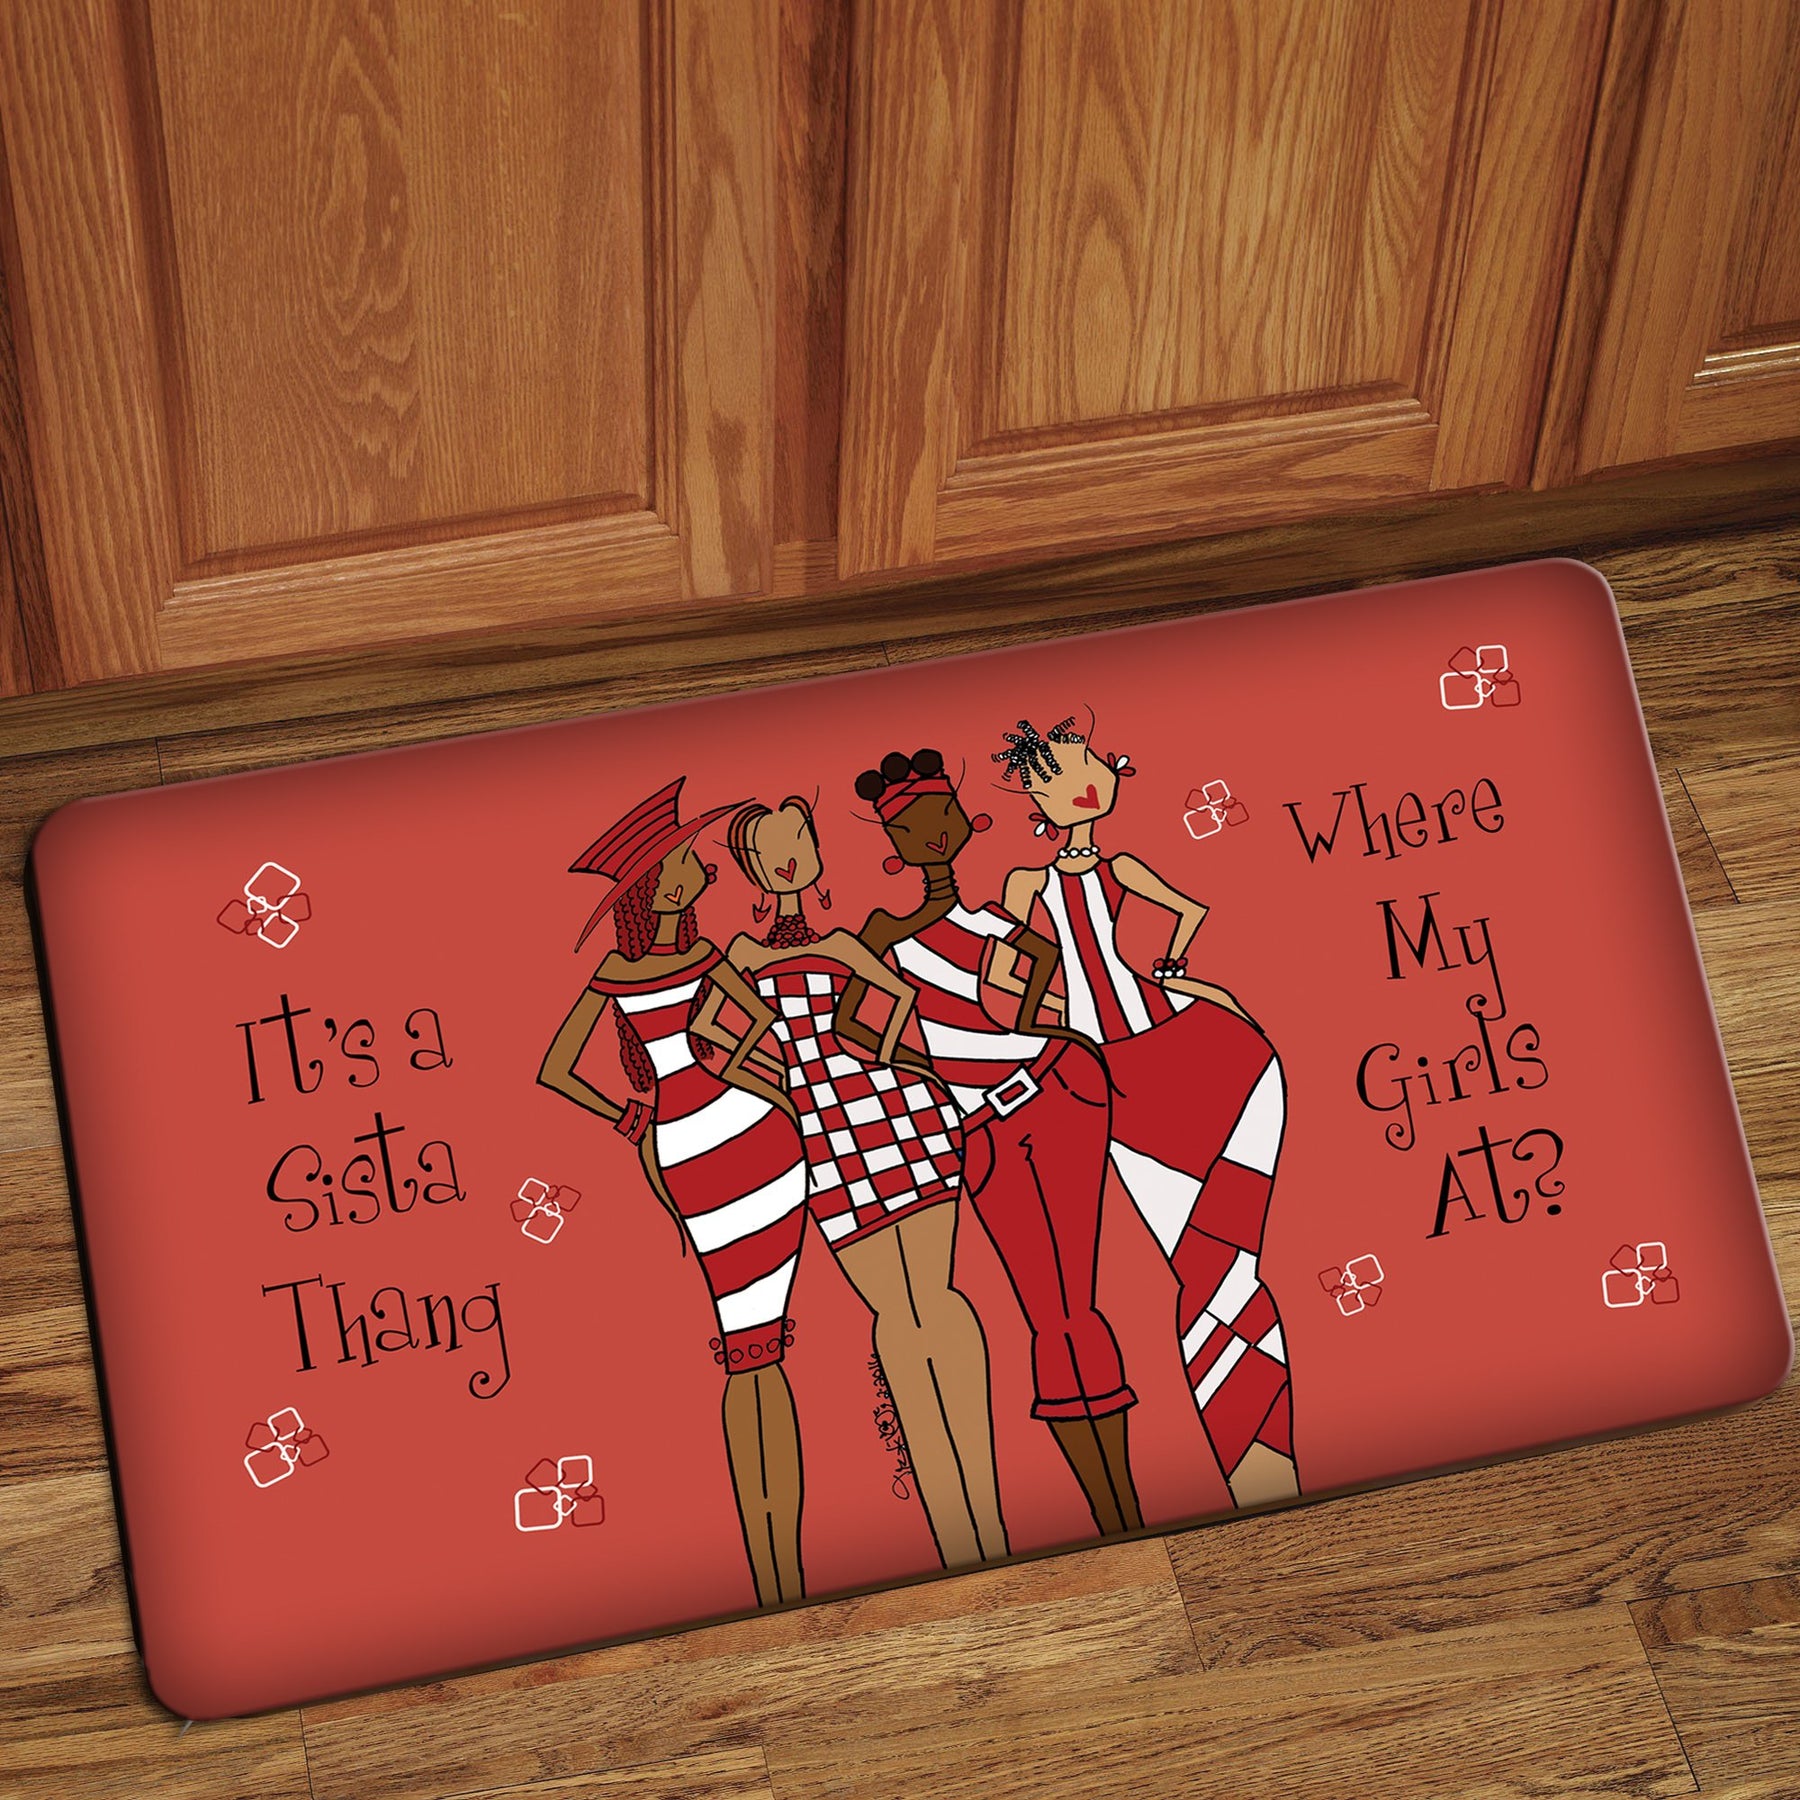 2 of 2: It's a Sista Thang - Where My Girls At?: Kiwi McDowell Interior Floor Mat by Shades of Color